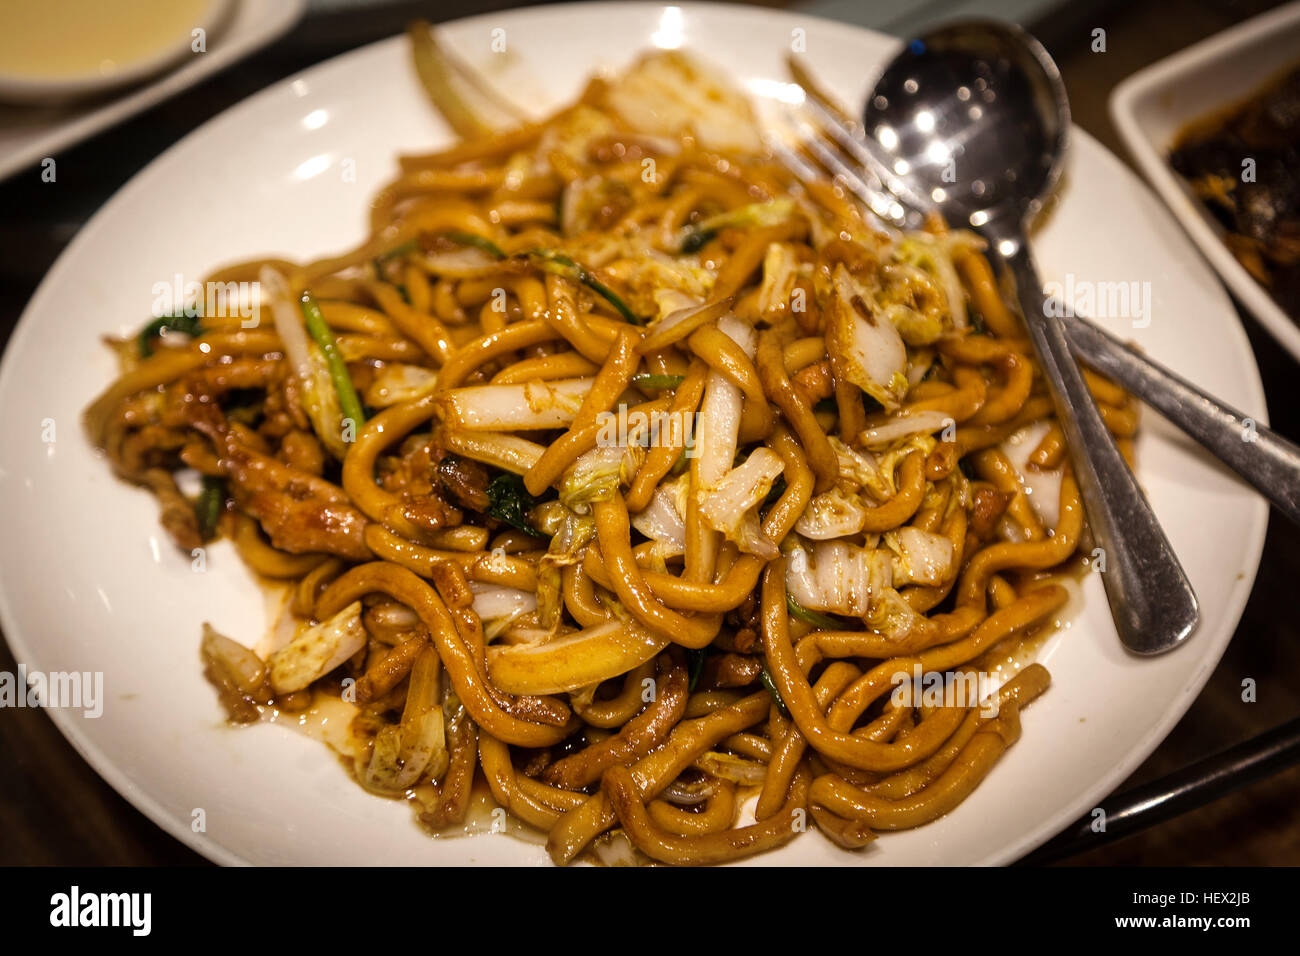 Shanghai fried noodles chow mein is a popular Chinese dish stir-fried ...